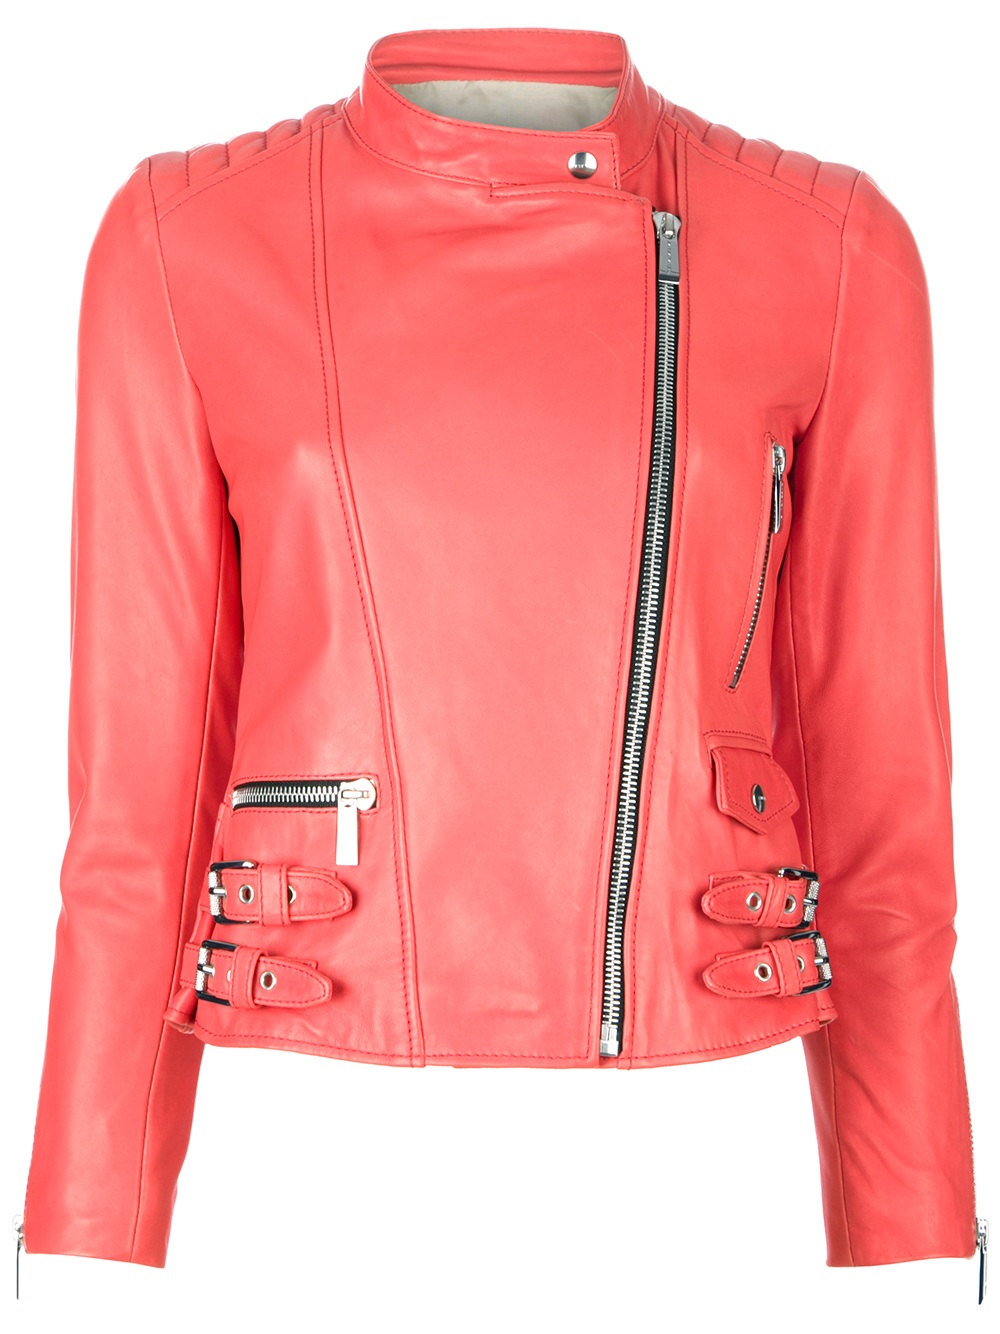 Barbara Bui Cropped Leather Jacket in Red (coral) | Lyst